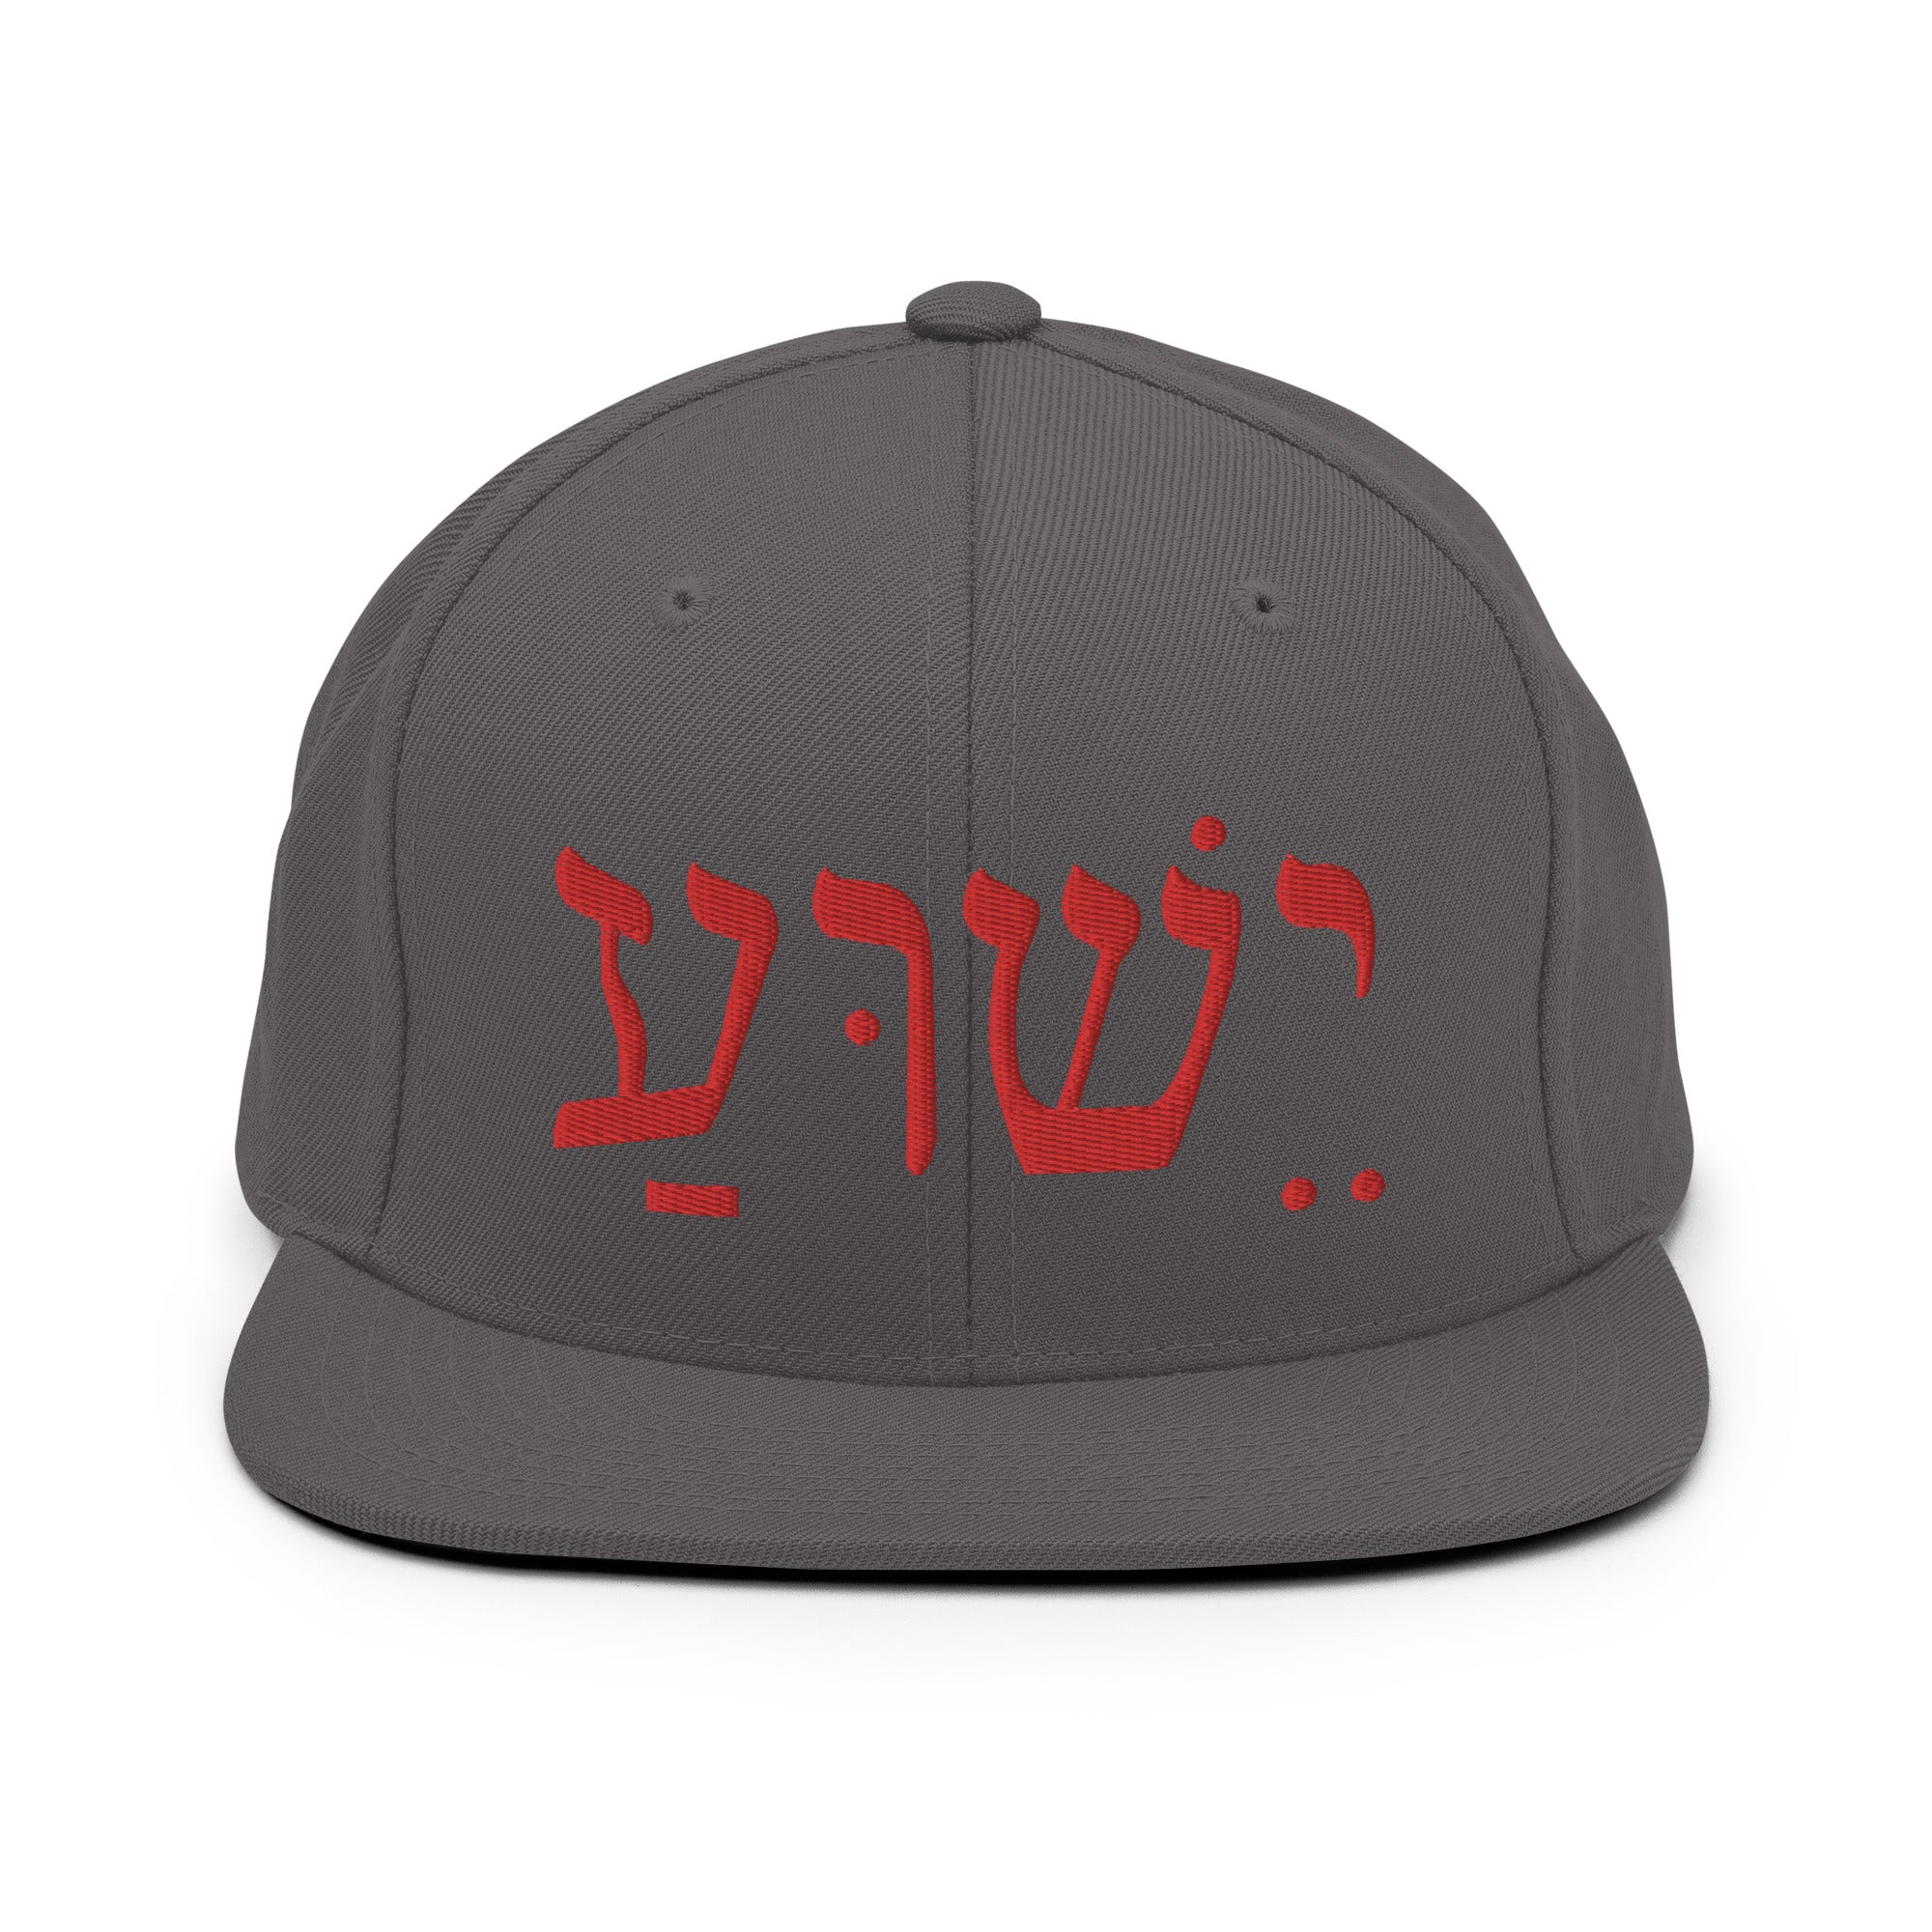 Yeshua Red Letters Snapback Hat